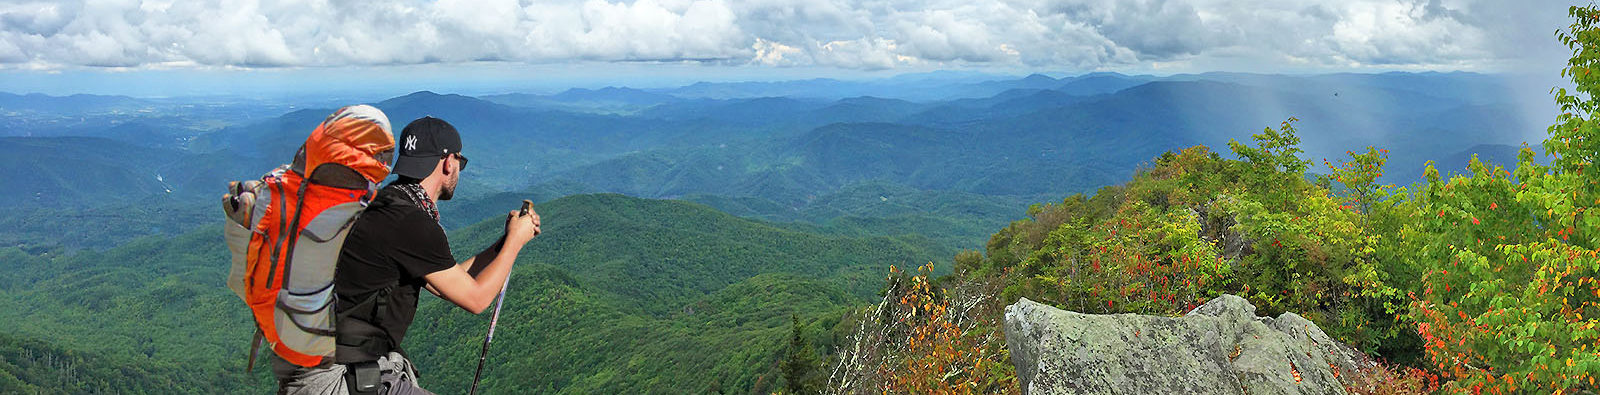 Great Smoky Mountains Backpacking Trips & Tours - NewinDentpicgsmbackpacking2 1600x395